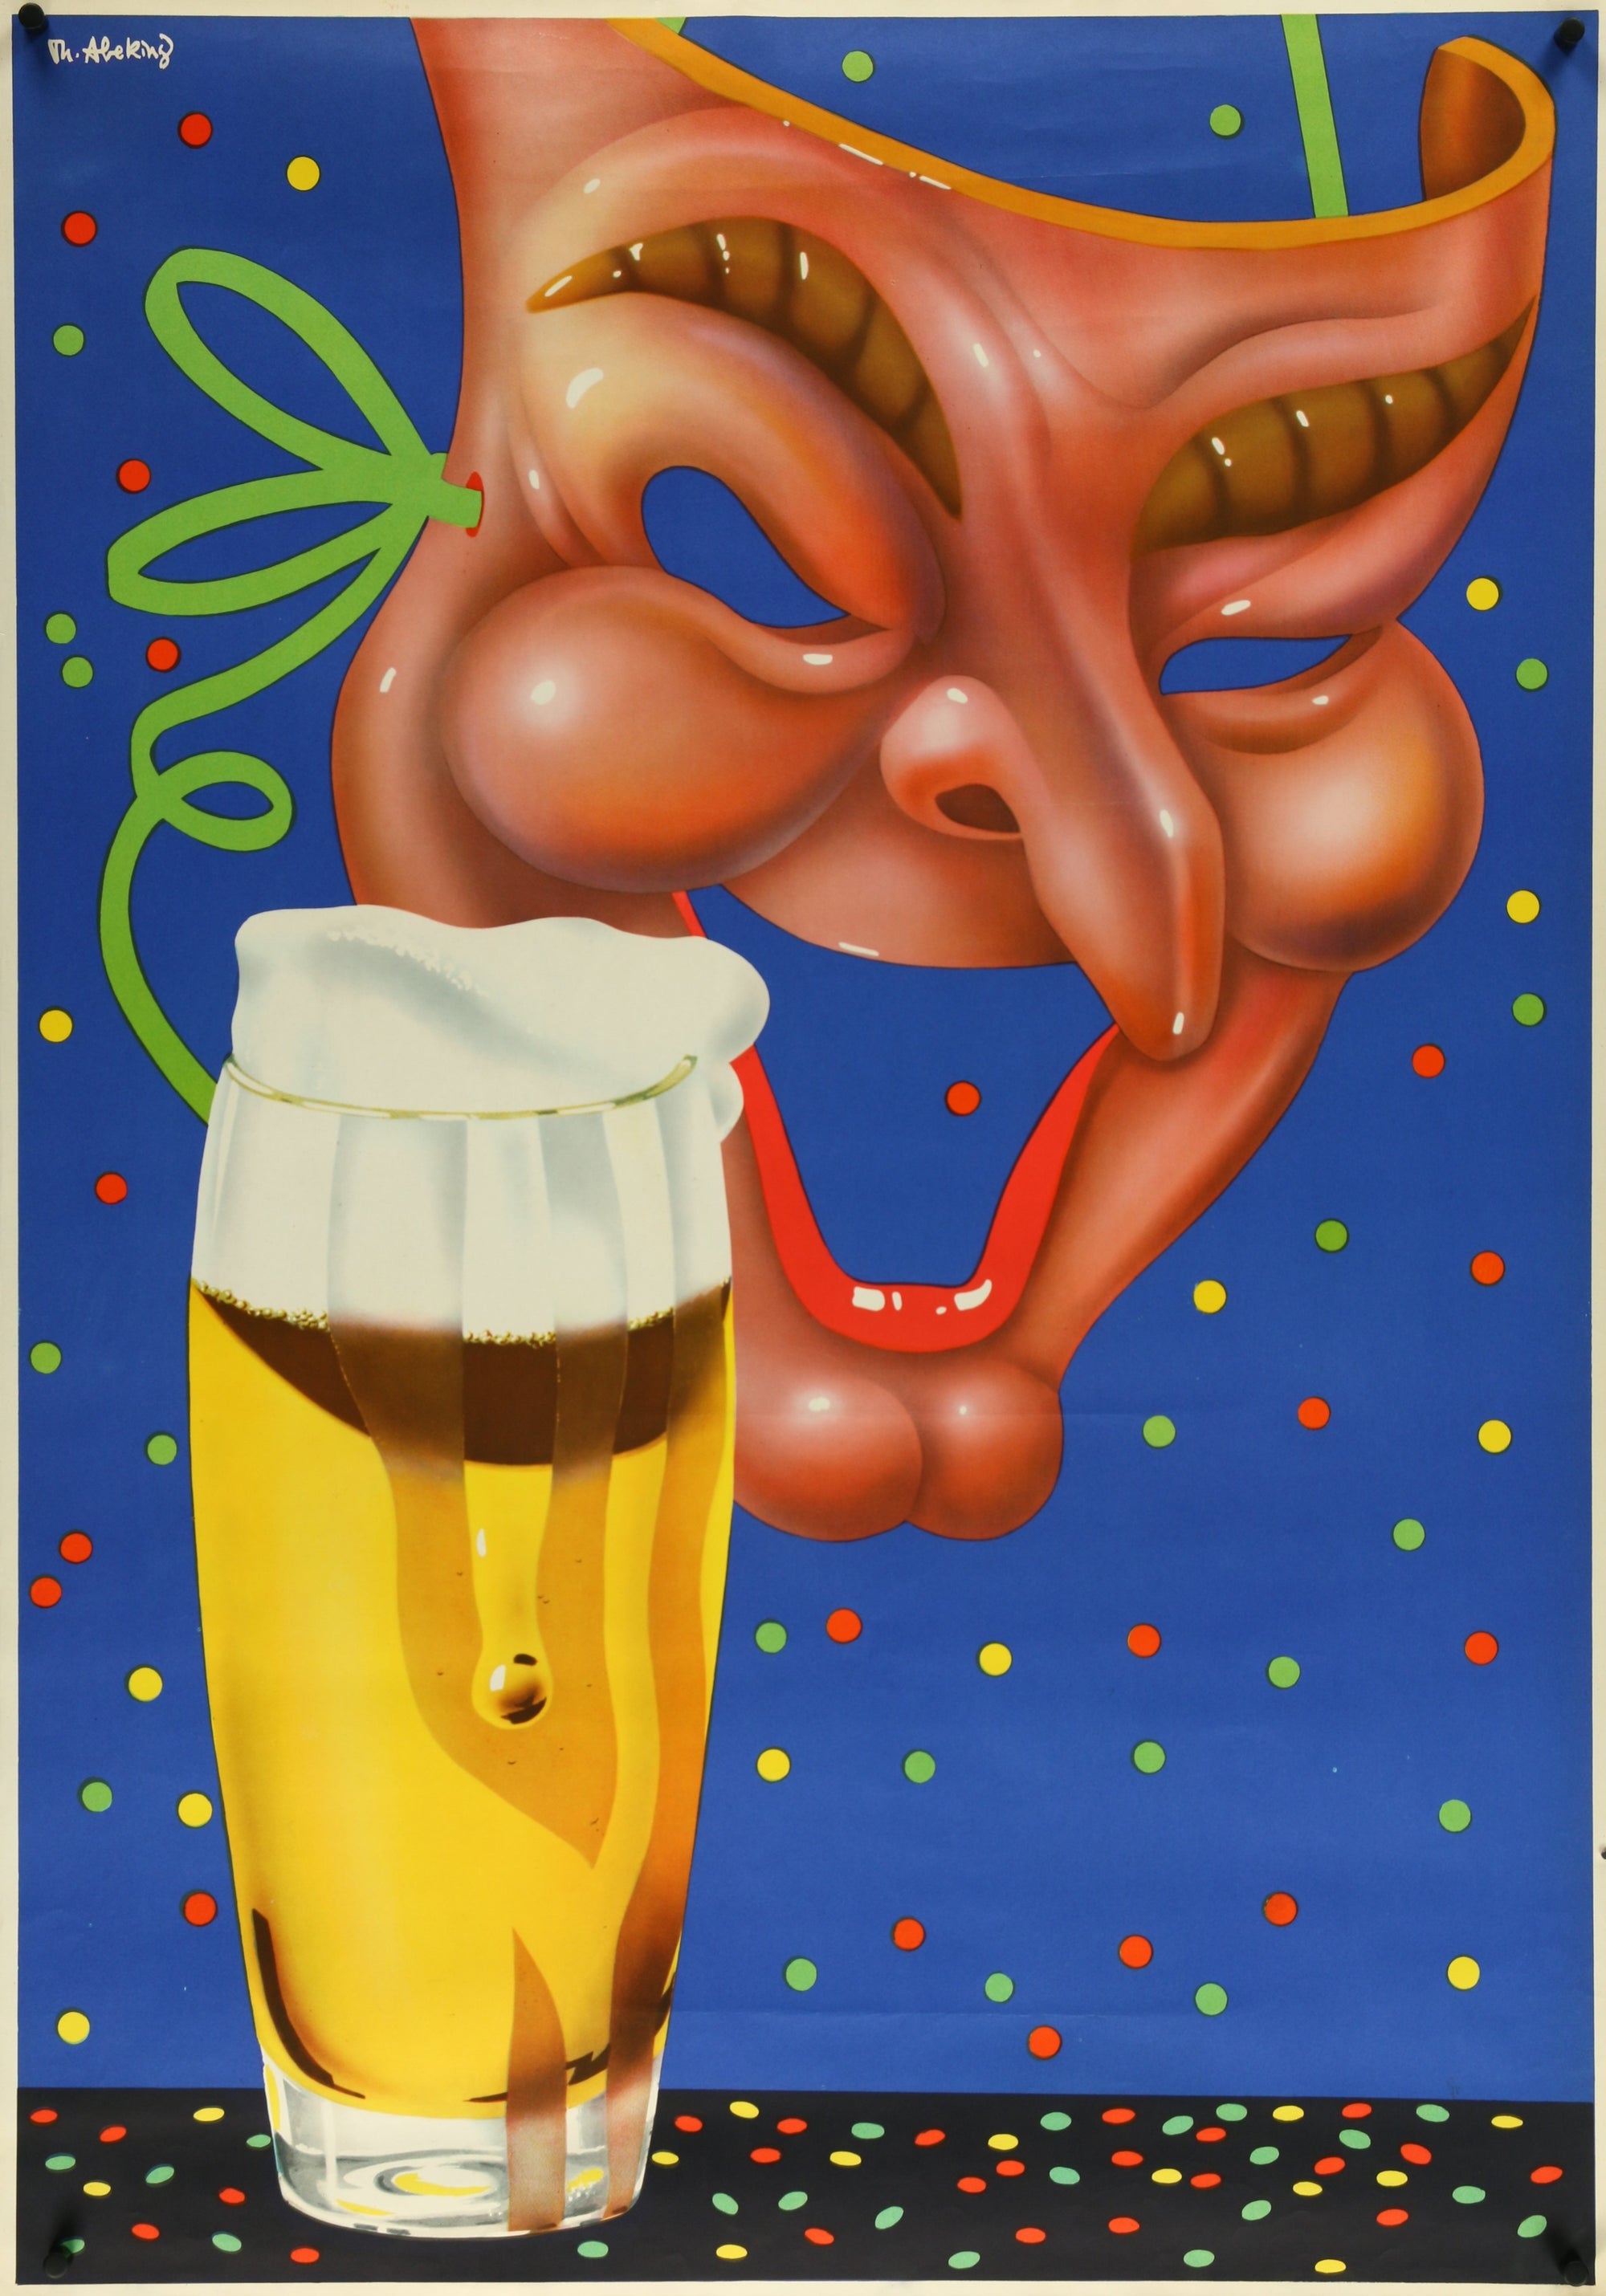 Carnival Beer Abeking - Authentic Vintage Poster